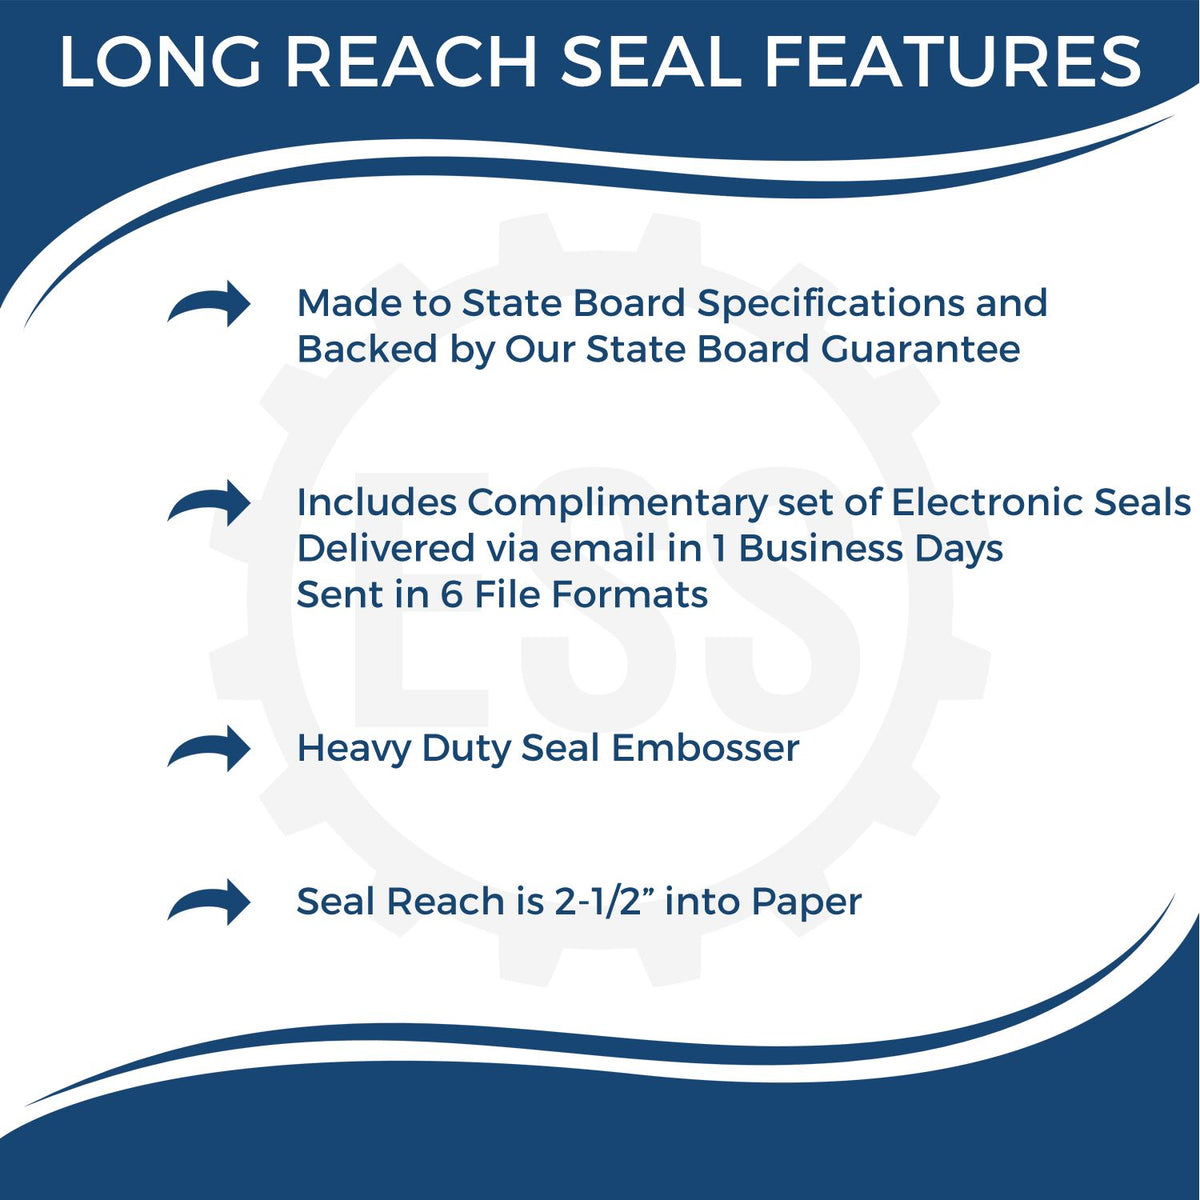 A picture of an infographic highlighting the selling points for the Long Reach West Virginia Geology Seal